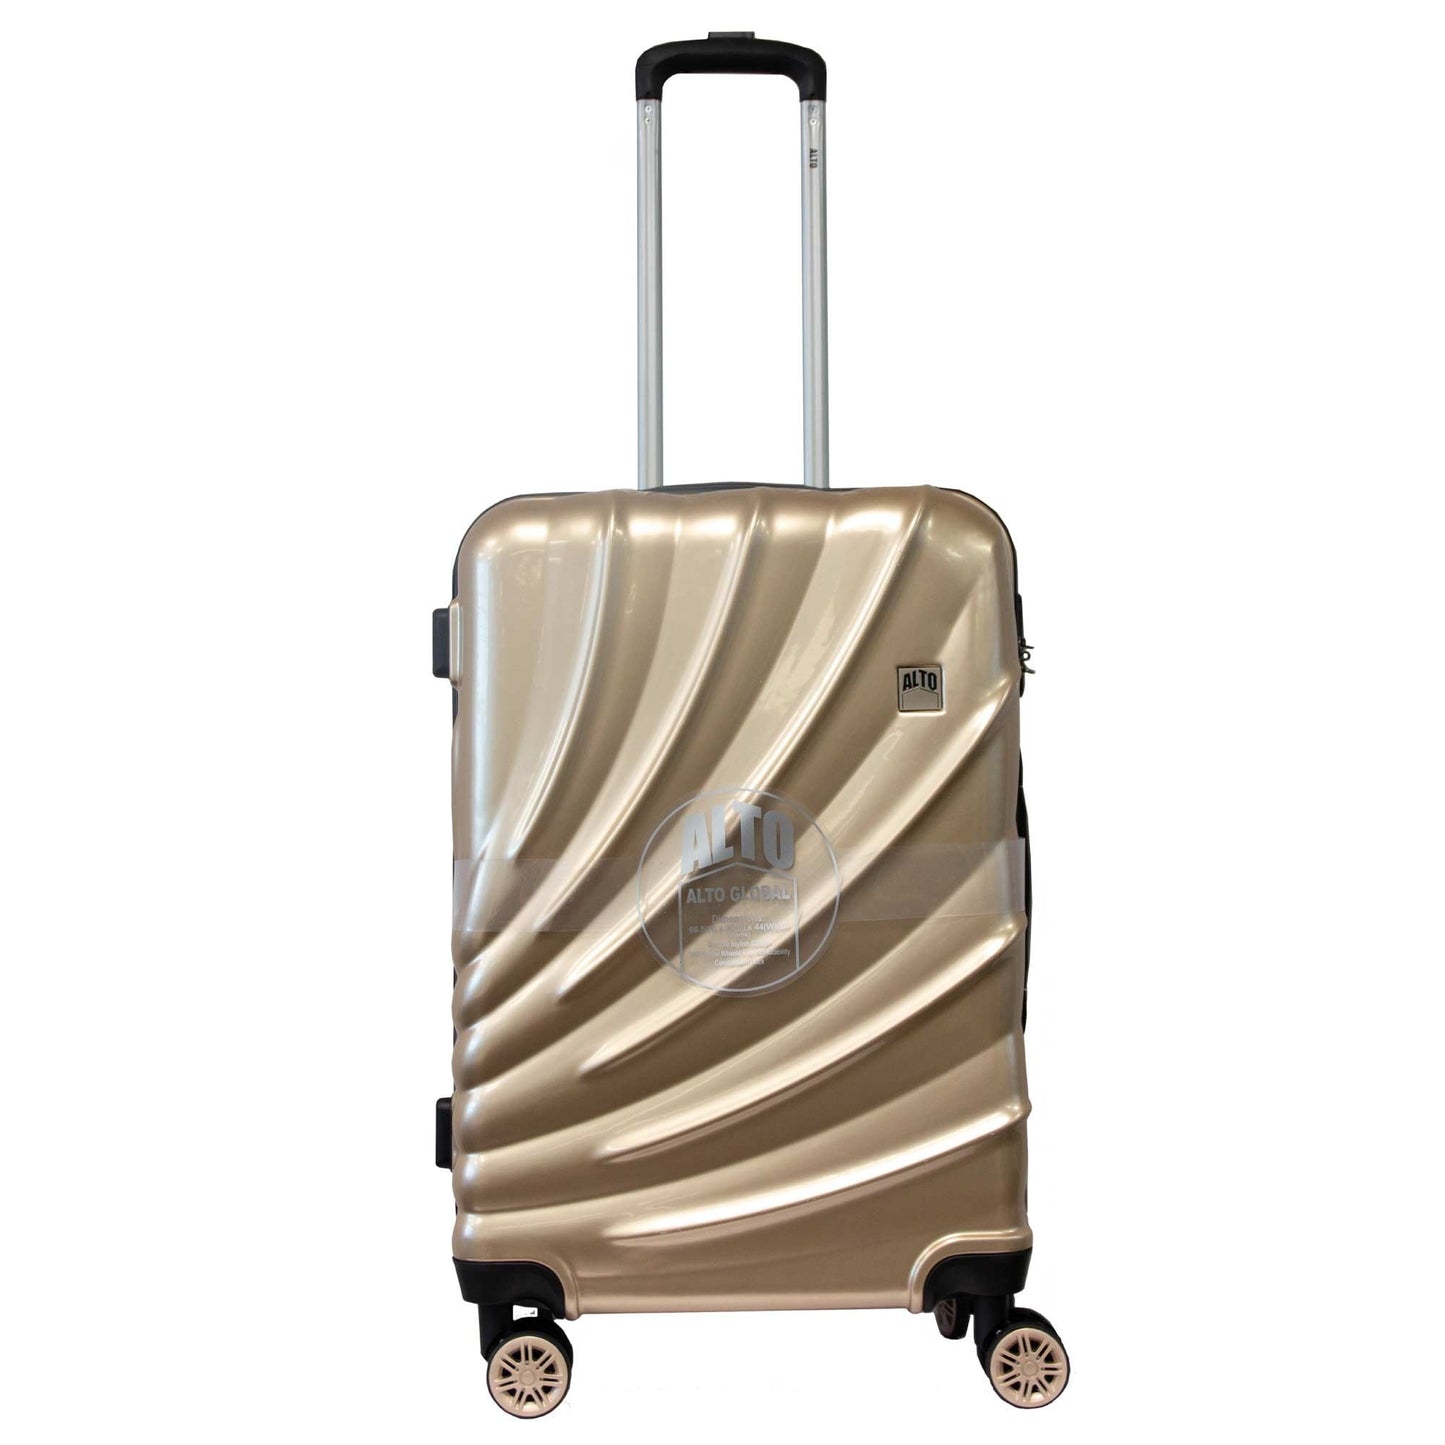 Alto Global Gloss ABS Luggage Suitcase Gold - 3 Sizes - 20 24 and 28inch